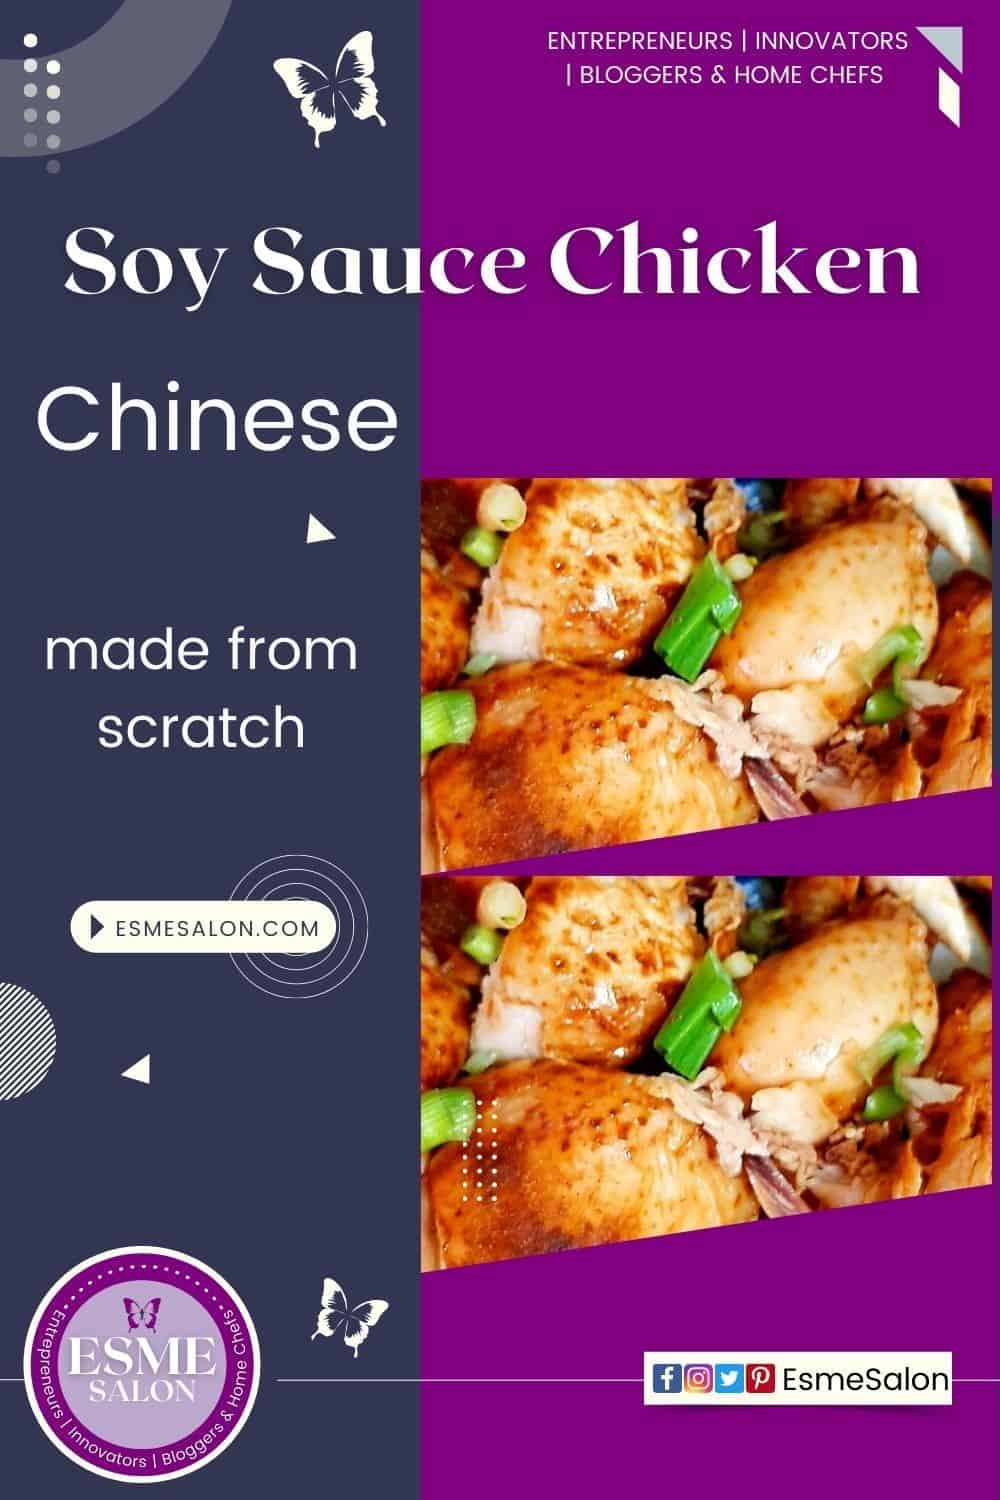 An image of a whole chicken cut up in pieces prepared in soy sauce